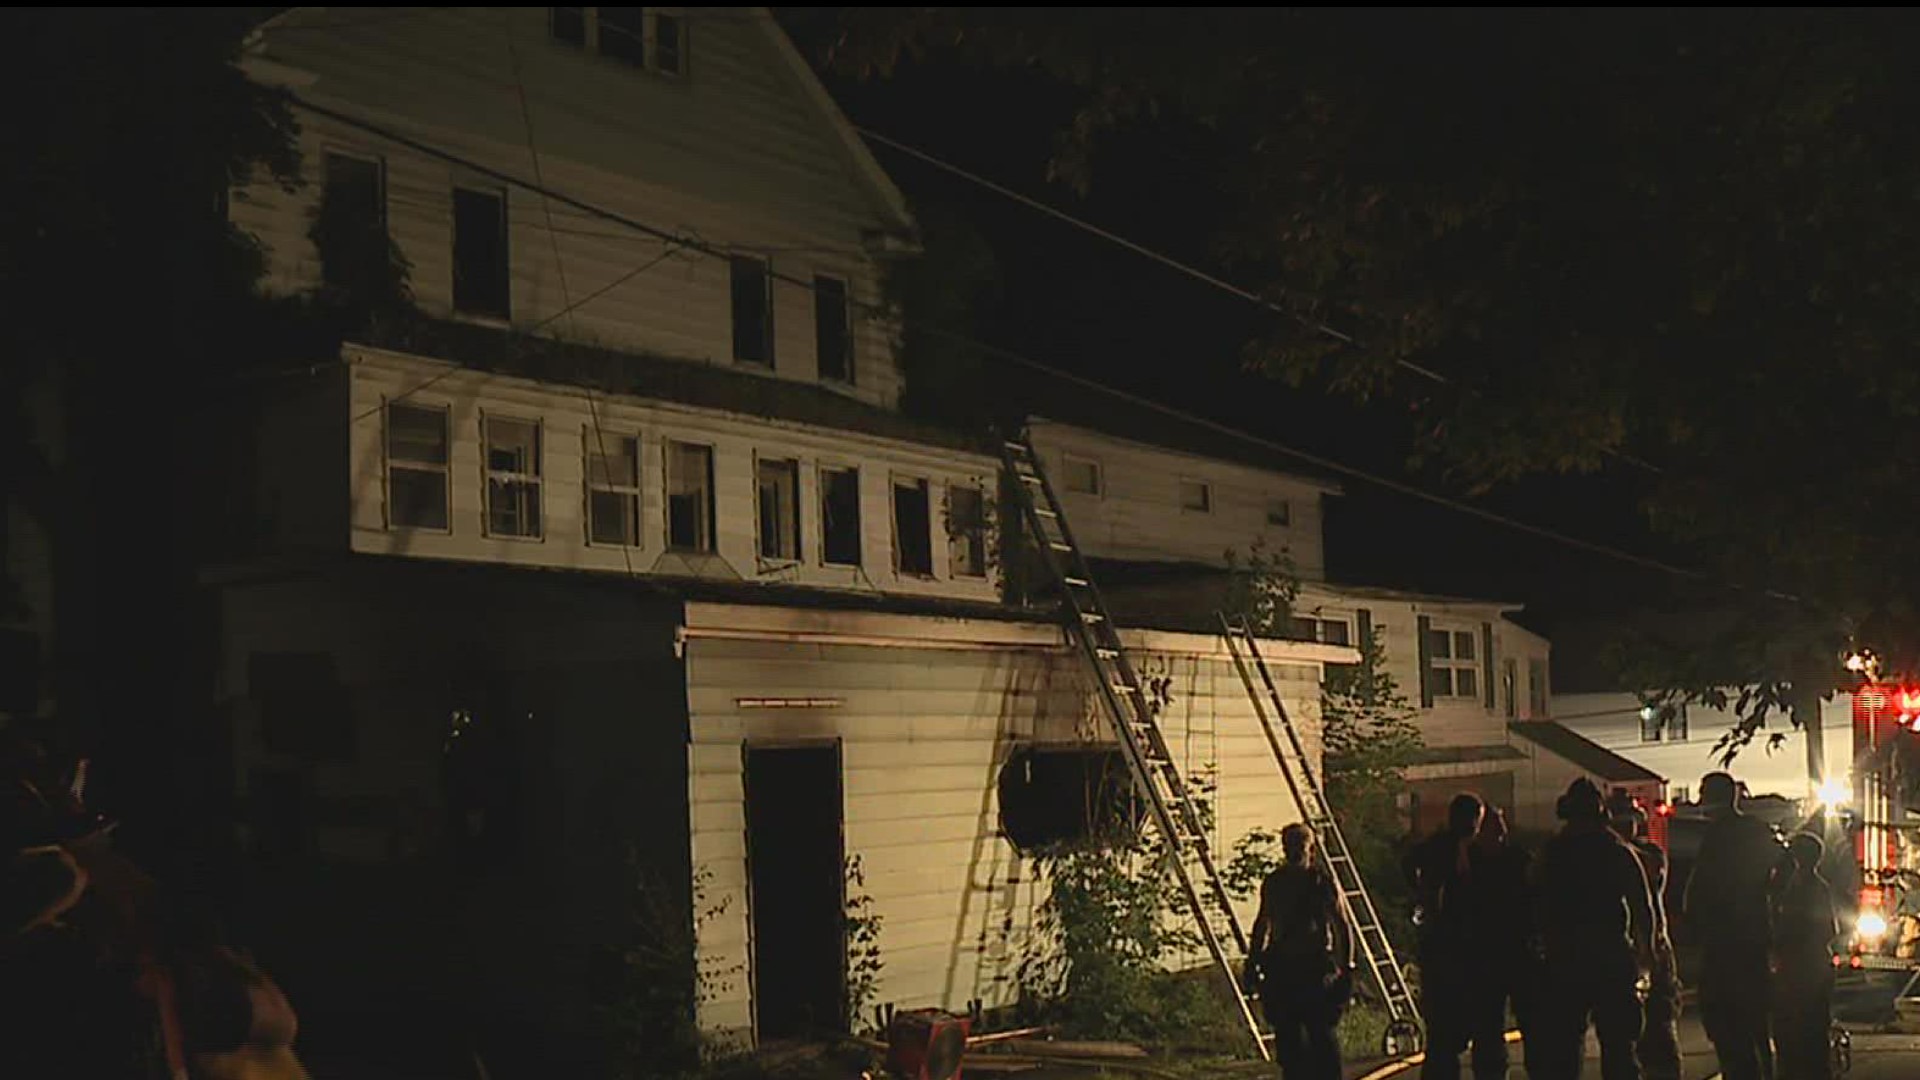 A cluttered building caused problems for firefighters Monday night in Luzerne County.